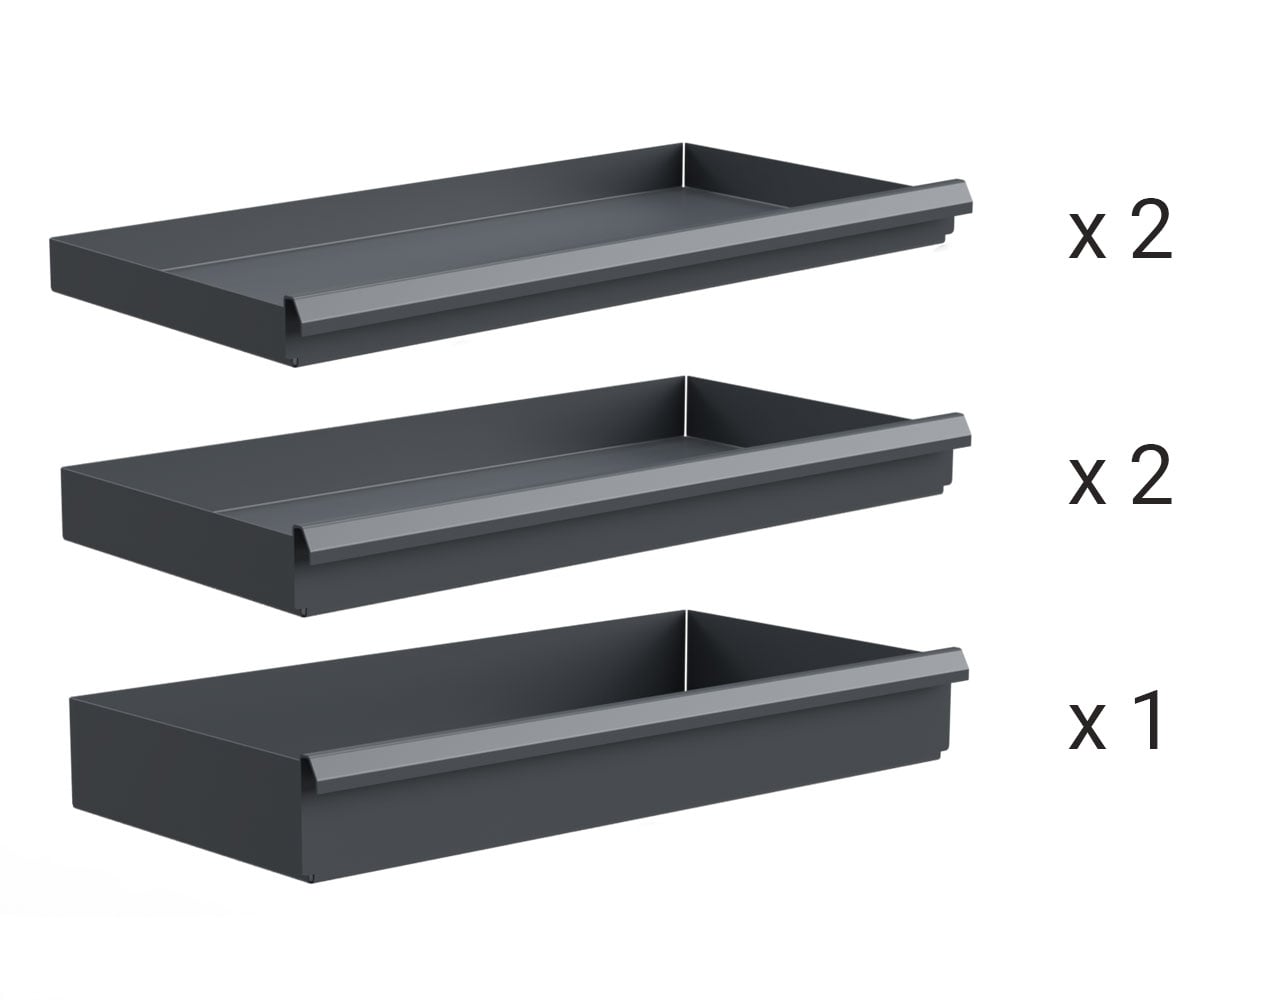 Extra Heavy Duty Drawer Kit with (2) 3in. (2) 4 in. (1) 6 in. Drawers for 60 in. W x 24 in. D Cabinet